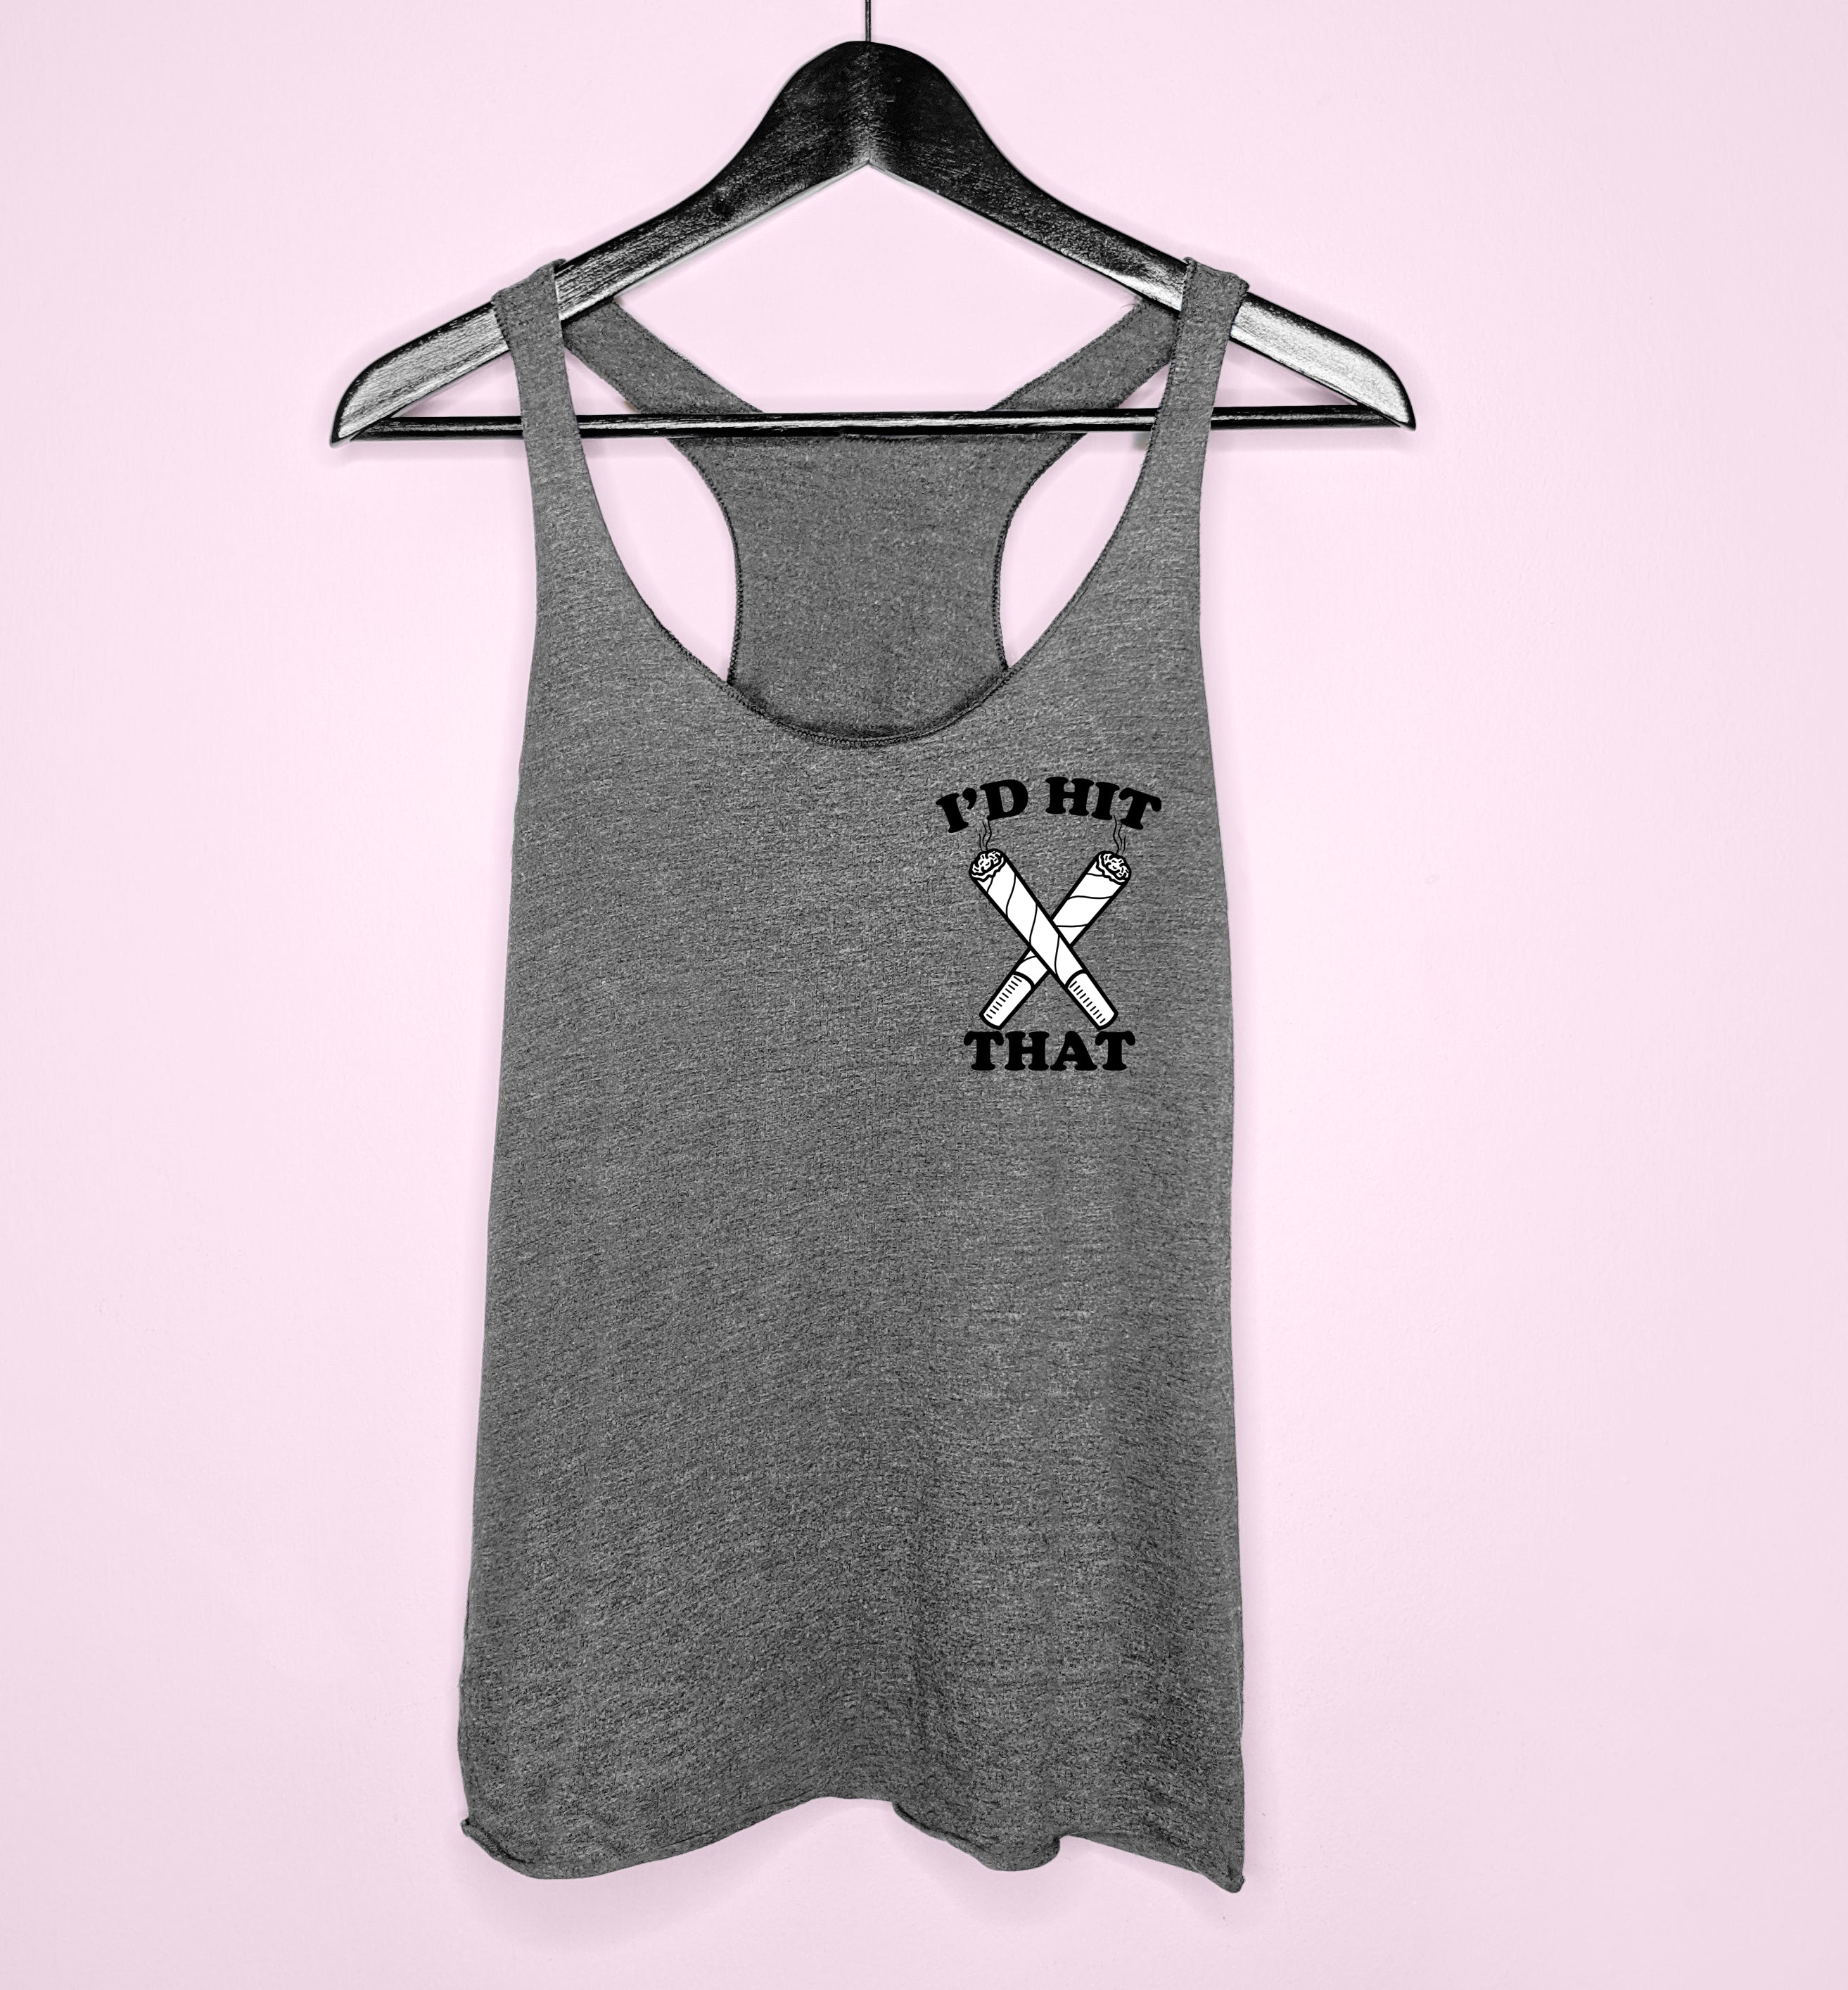 Grey Women's tank with cross joints saying I'd hit that - HighCiti